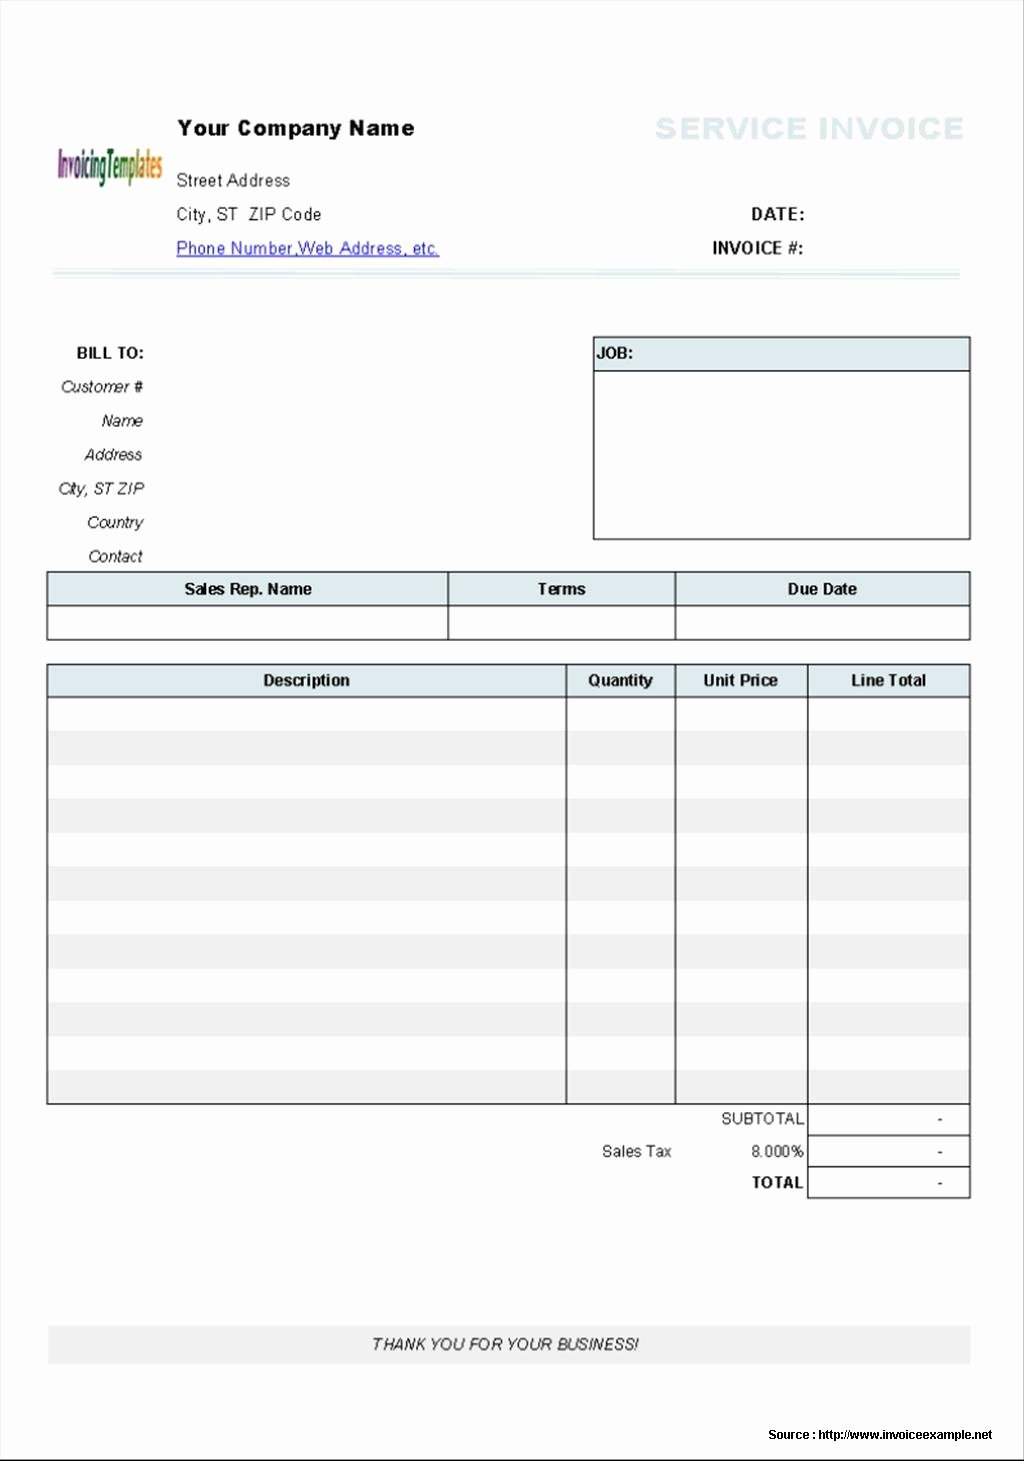 Blank Invoice Template Free Beautiful Blank Invoice Template Download Free form Resume